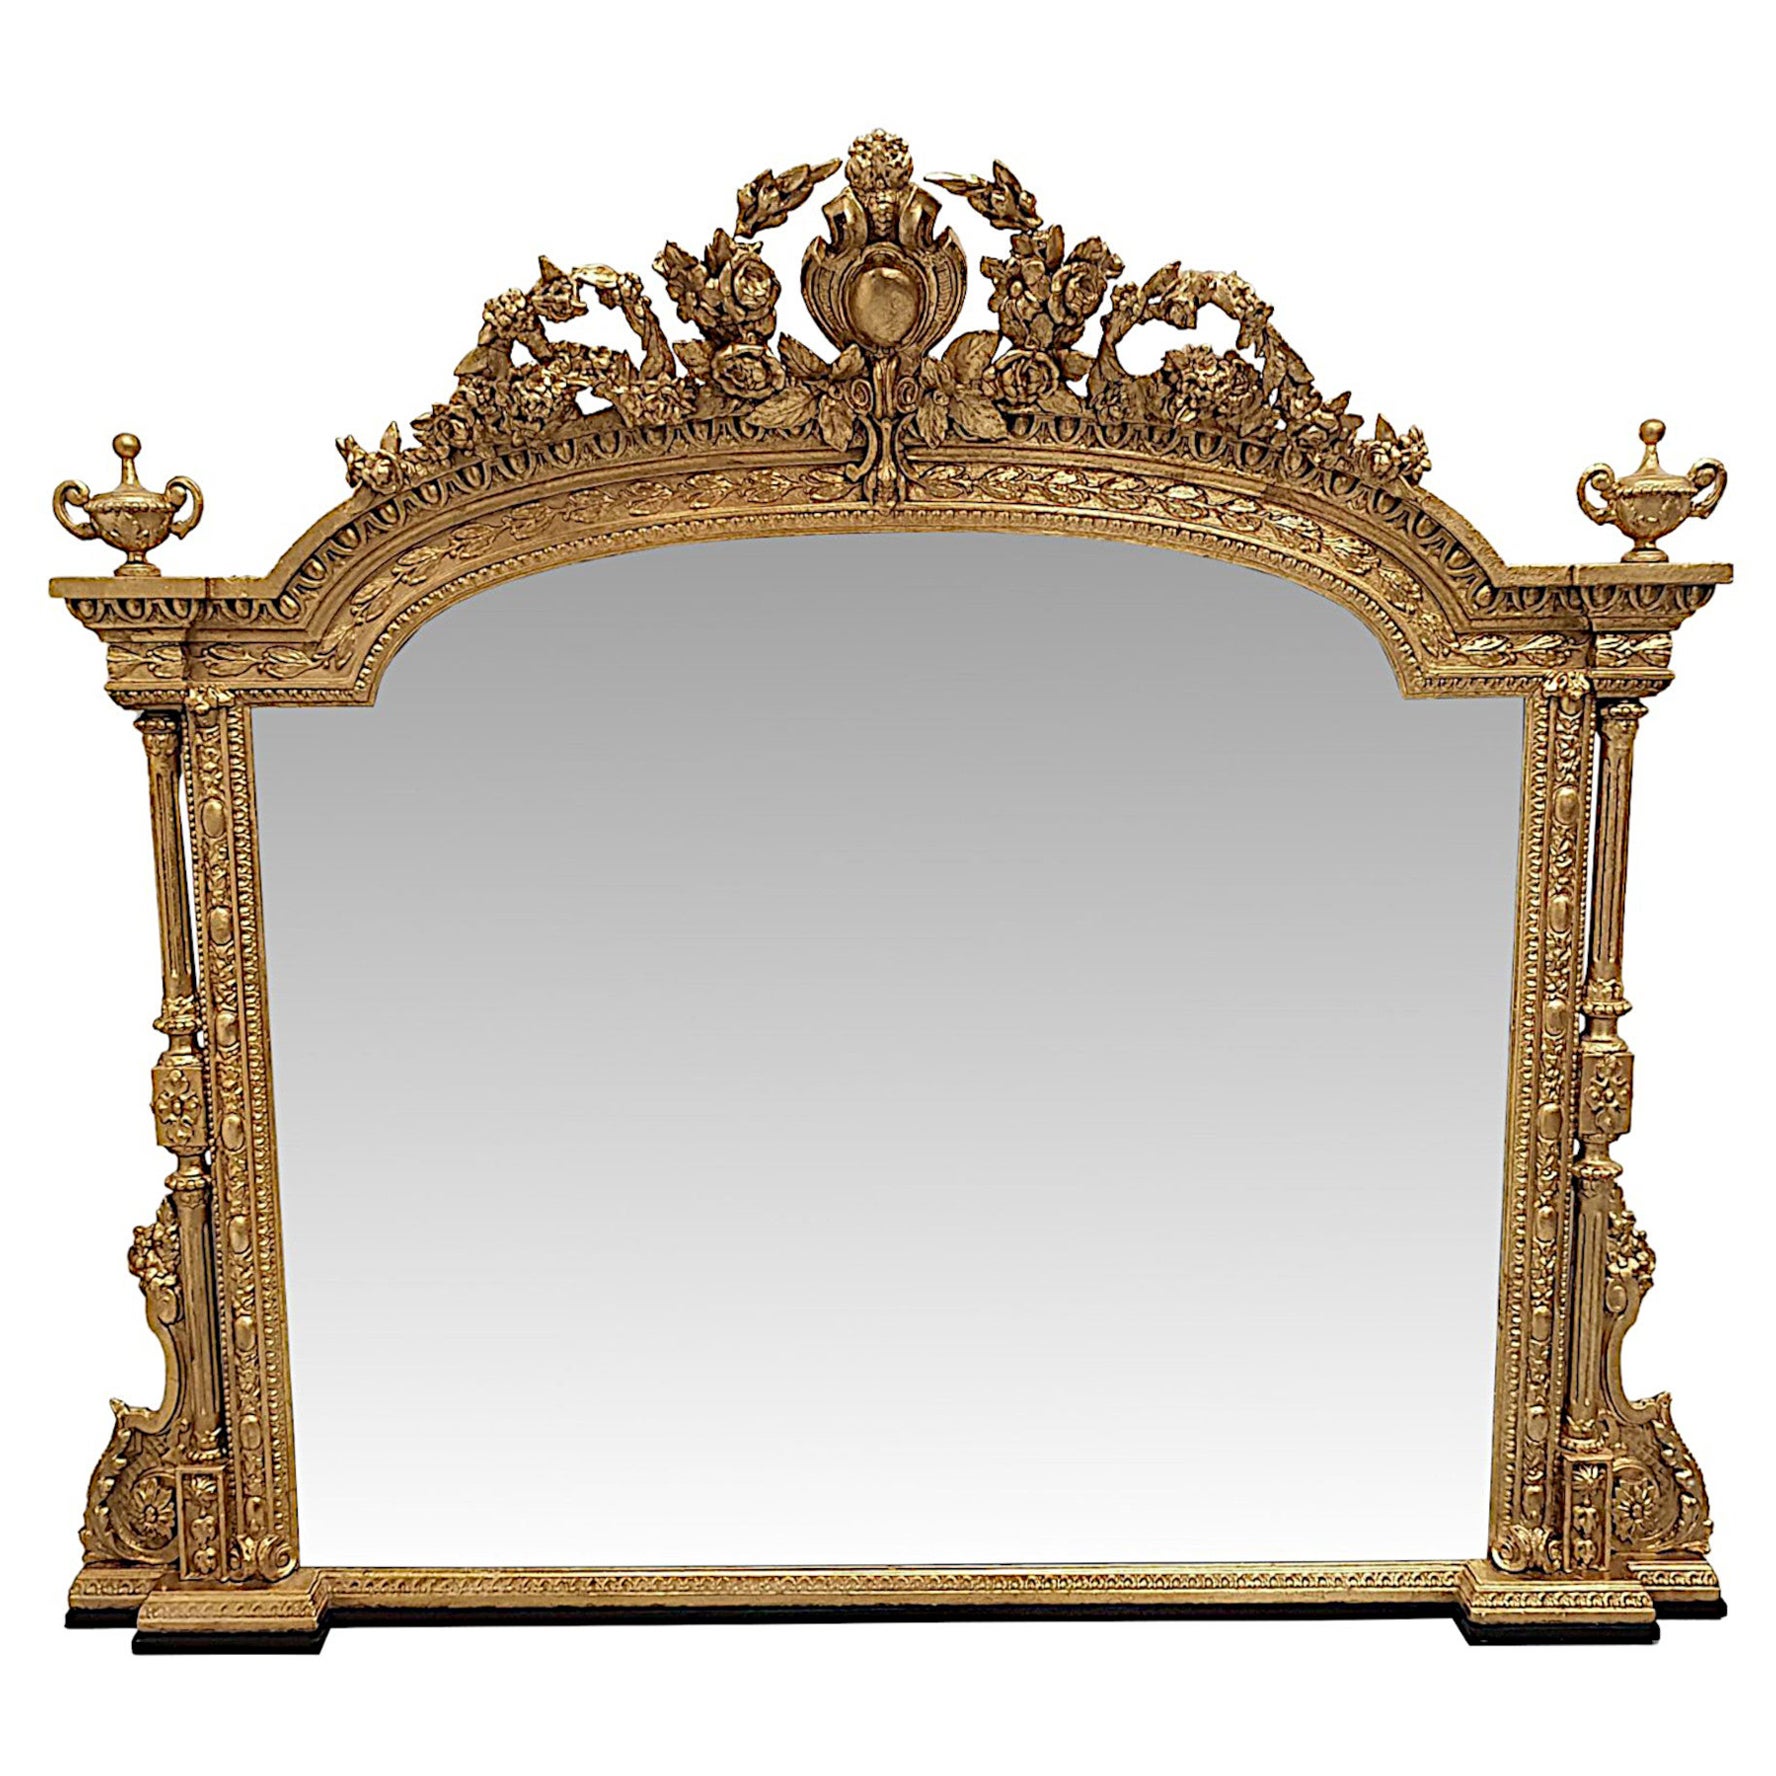  A Very Rare and Impressive 19th Century Giltwood Overmantle Mirror